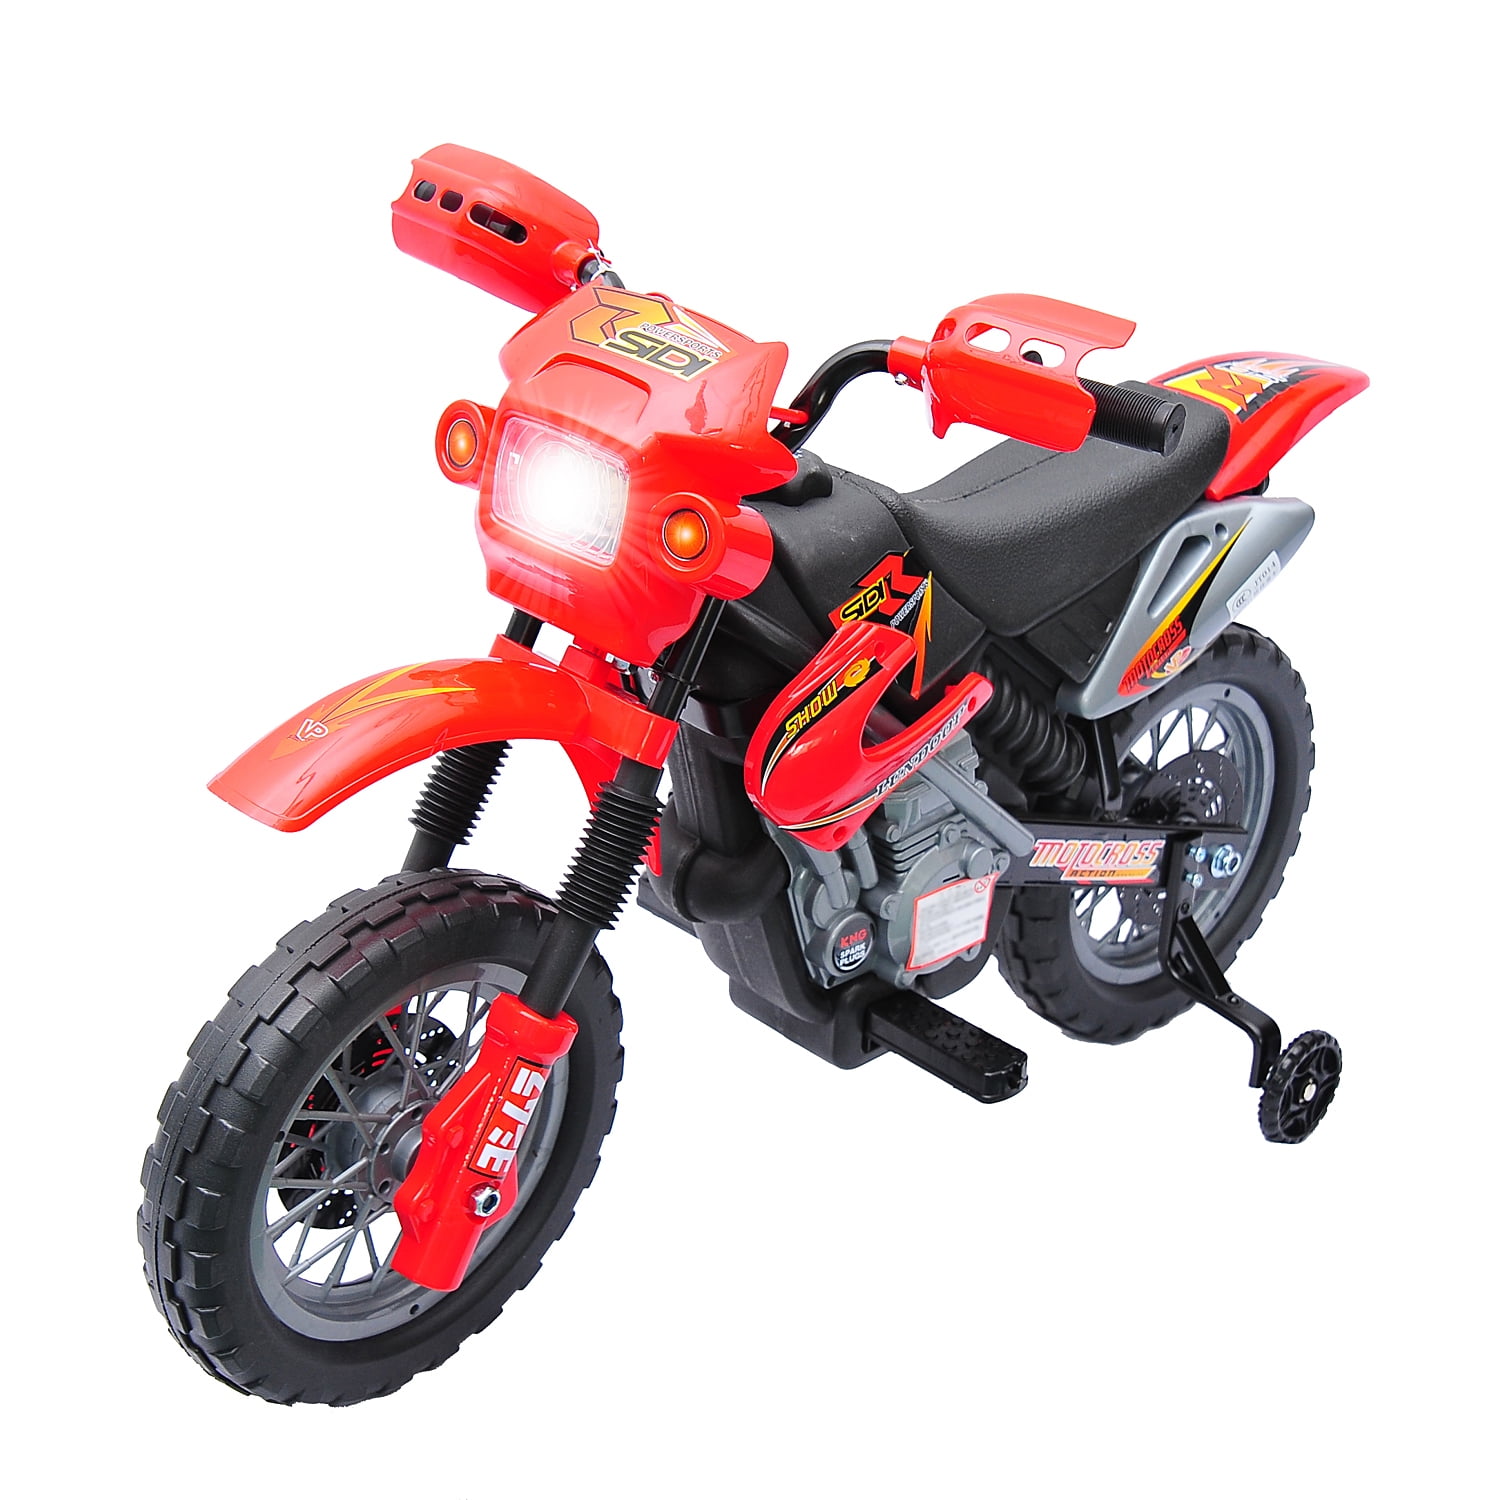 2mph Max Lights Best Choice Products 6V Kids Electric Battery Powered Ride On Motorcycle w/ Training Wheels Music 